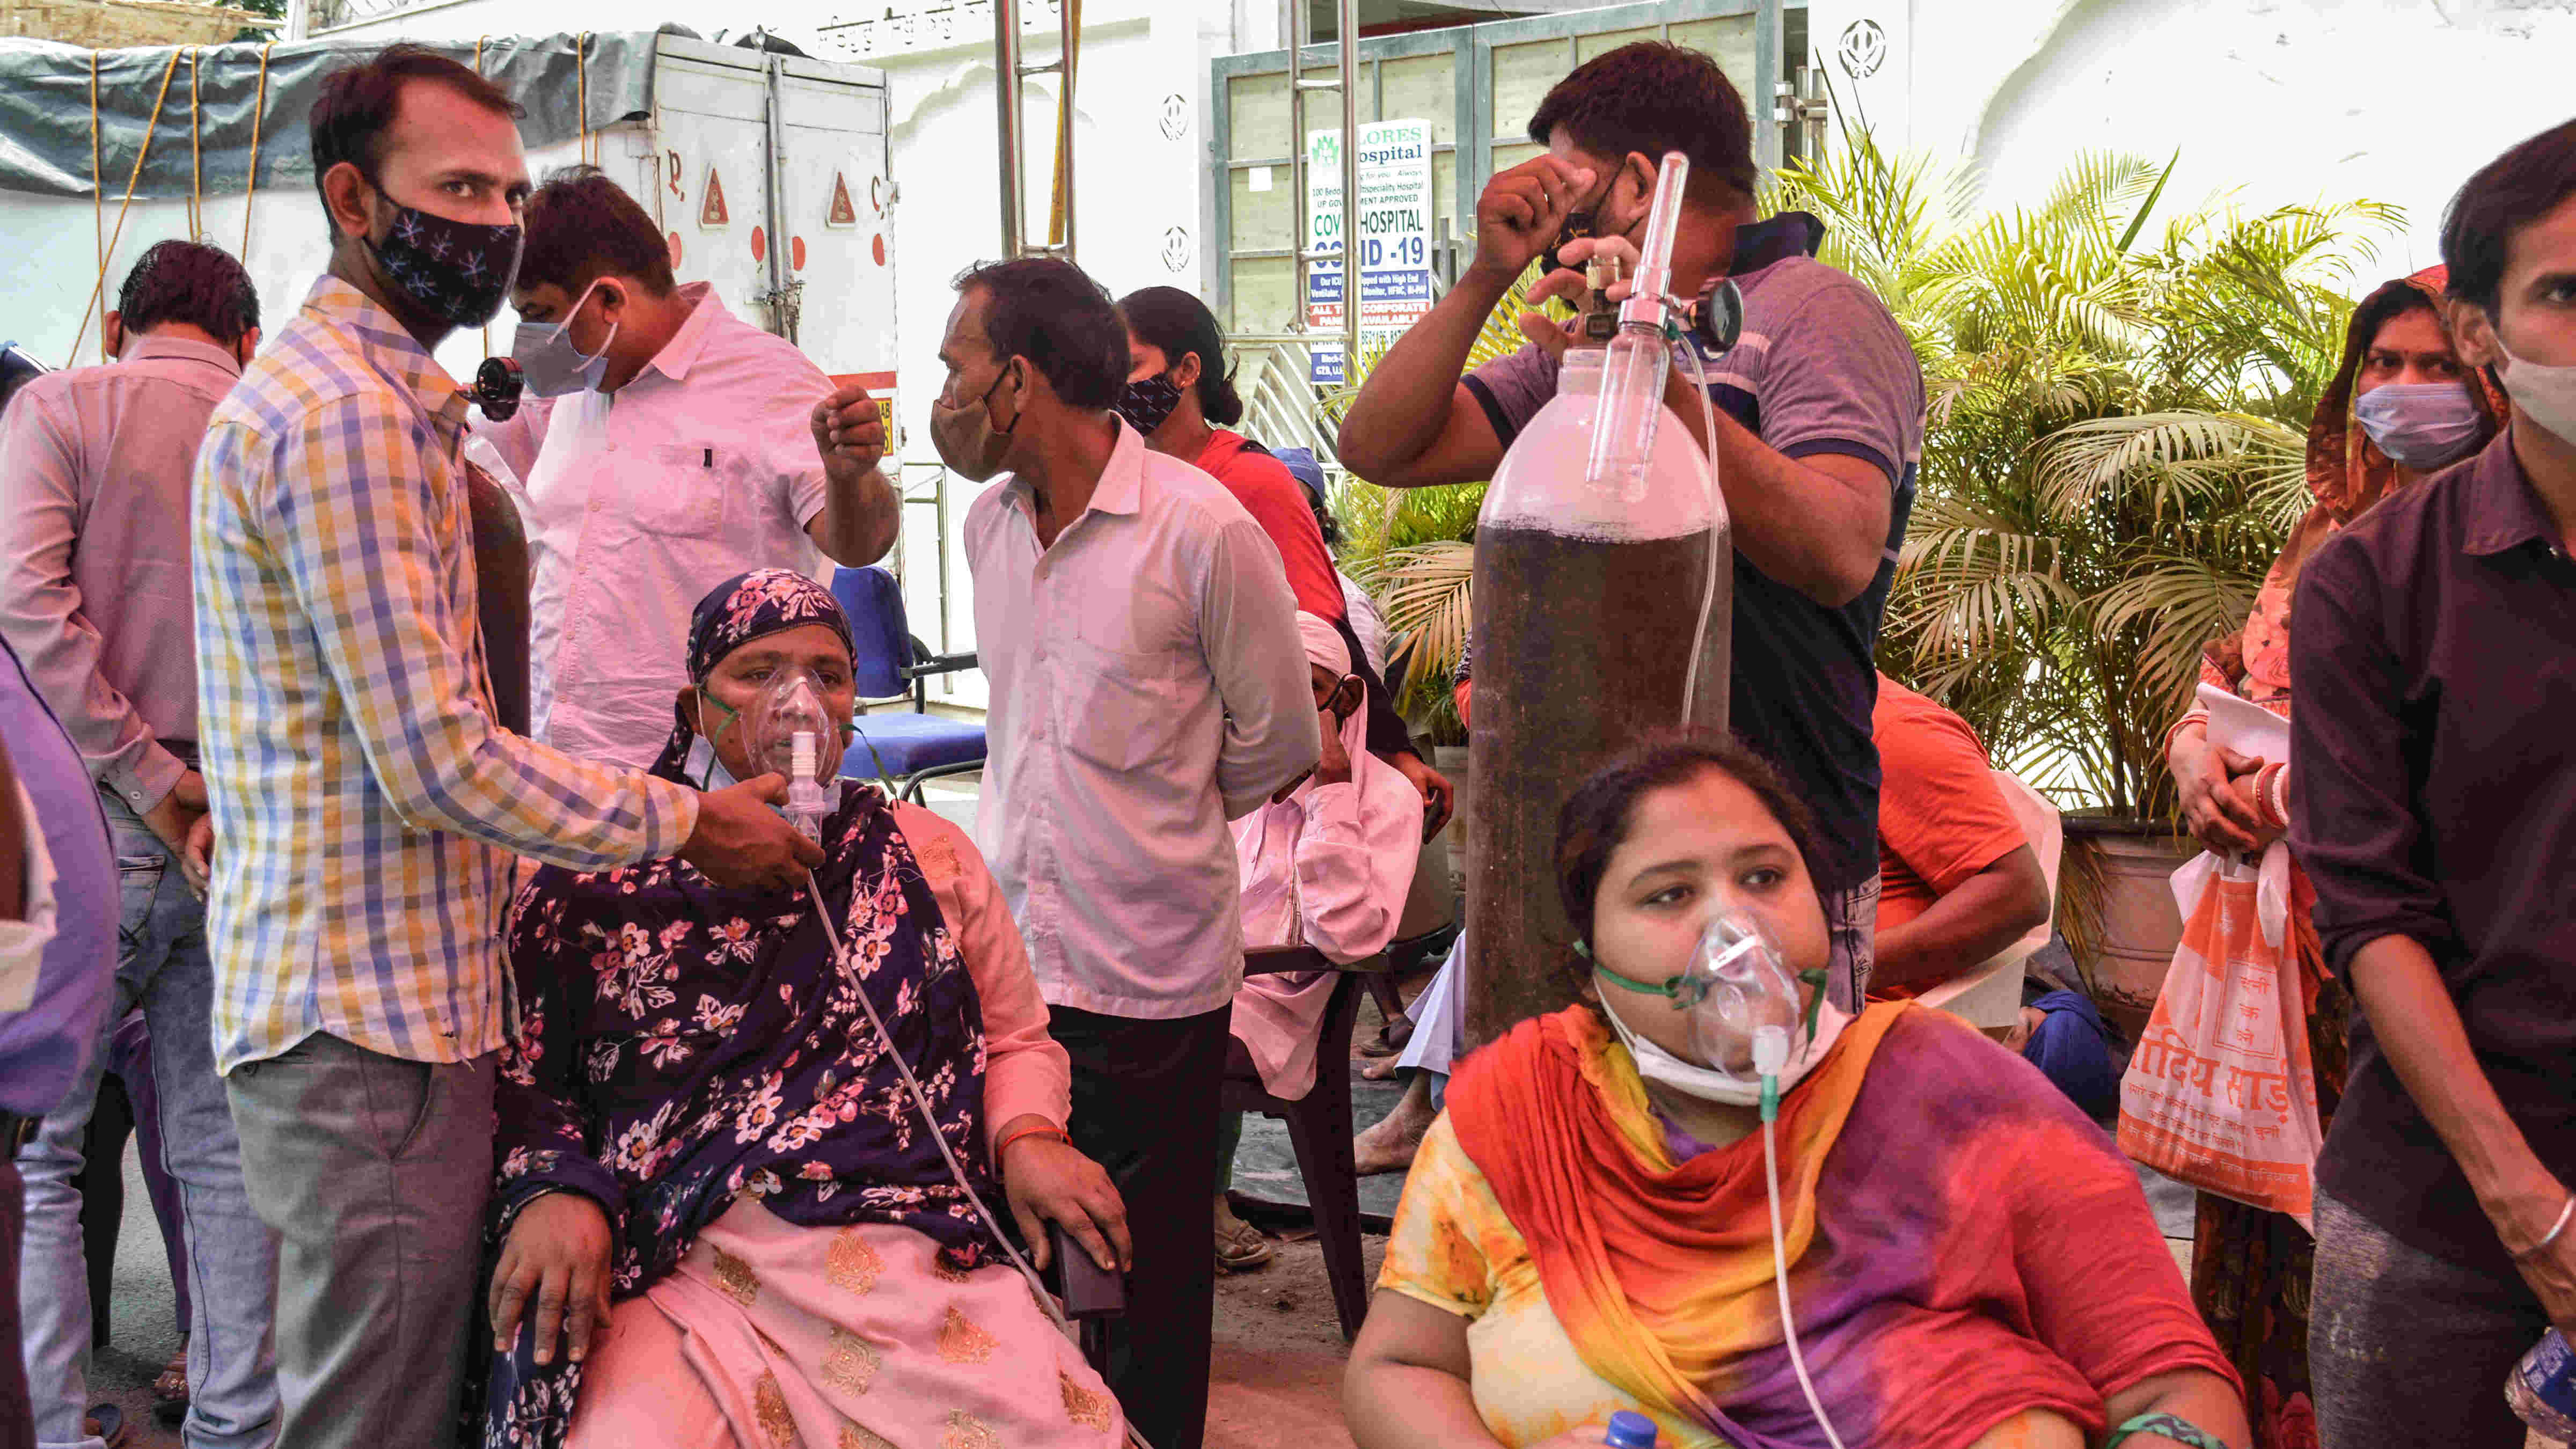 Covid-19 patients receive free oxygen, provided by a Sikh organization at Indirapuram Gurudwara, in Ghaziabad, Monday, April 26, 2021.